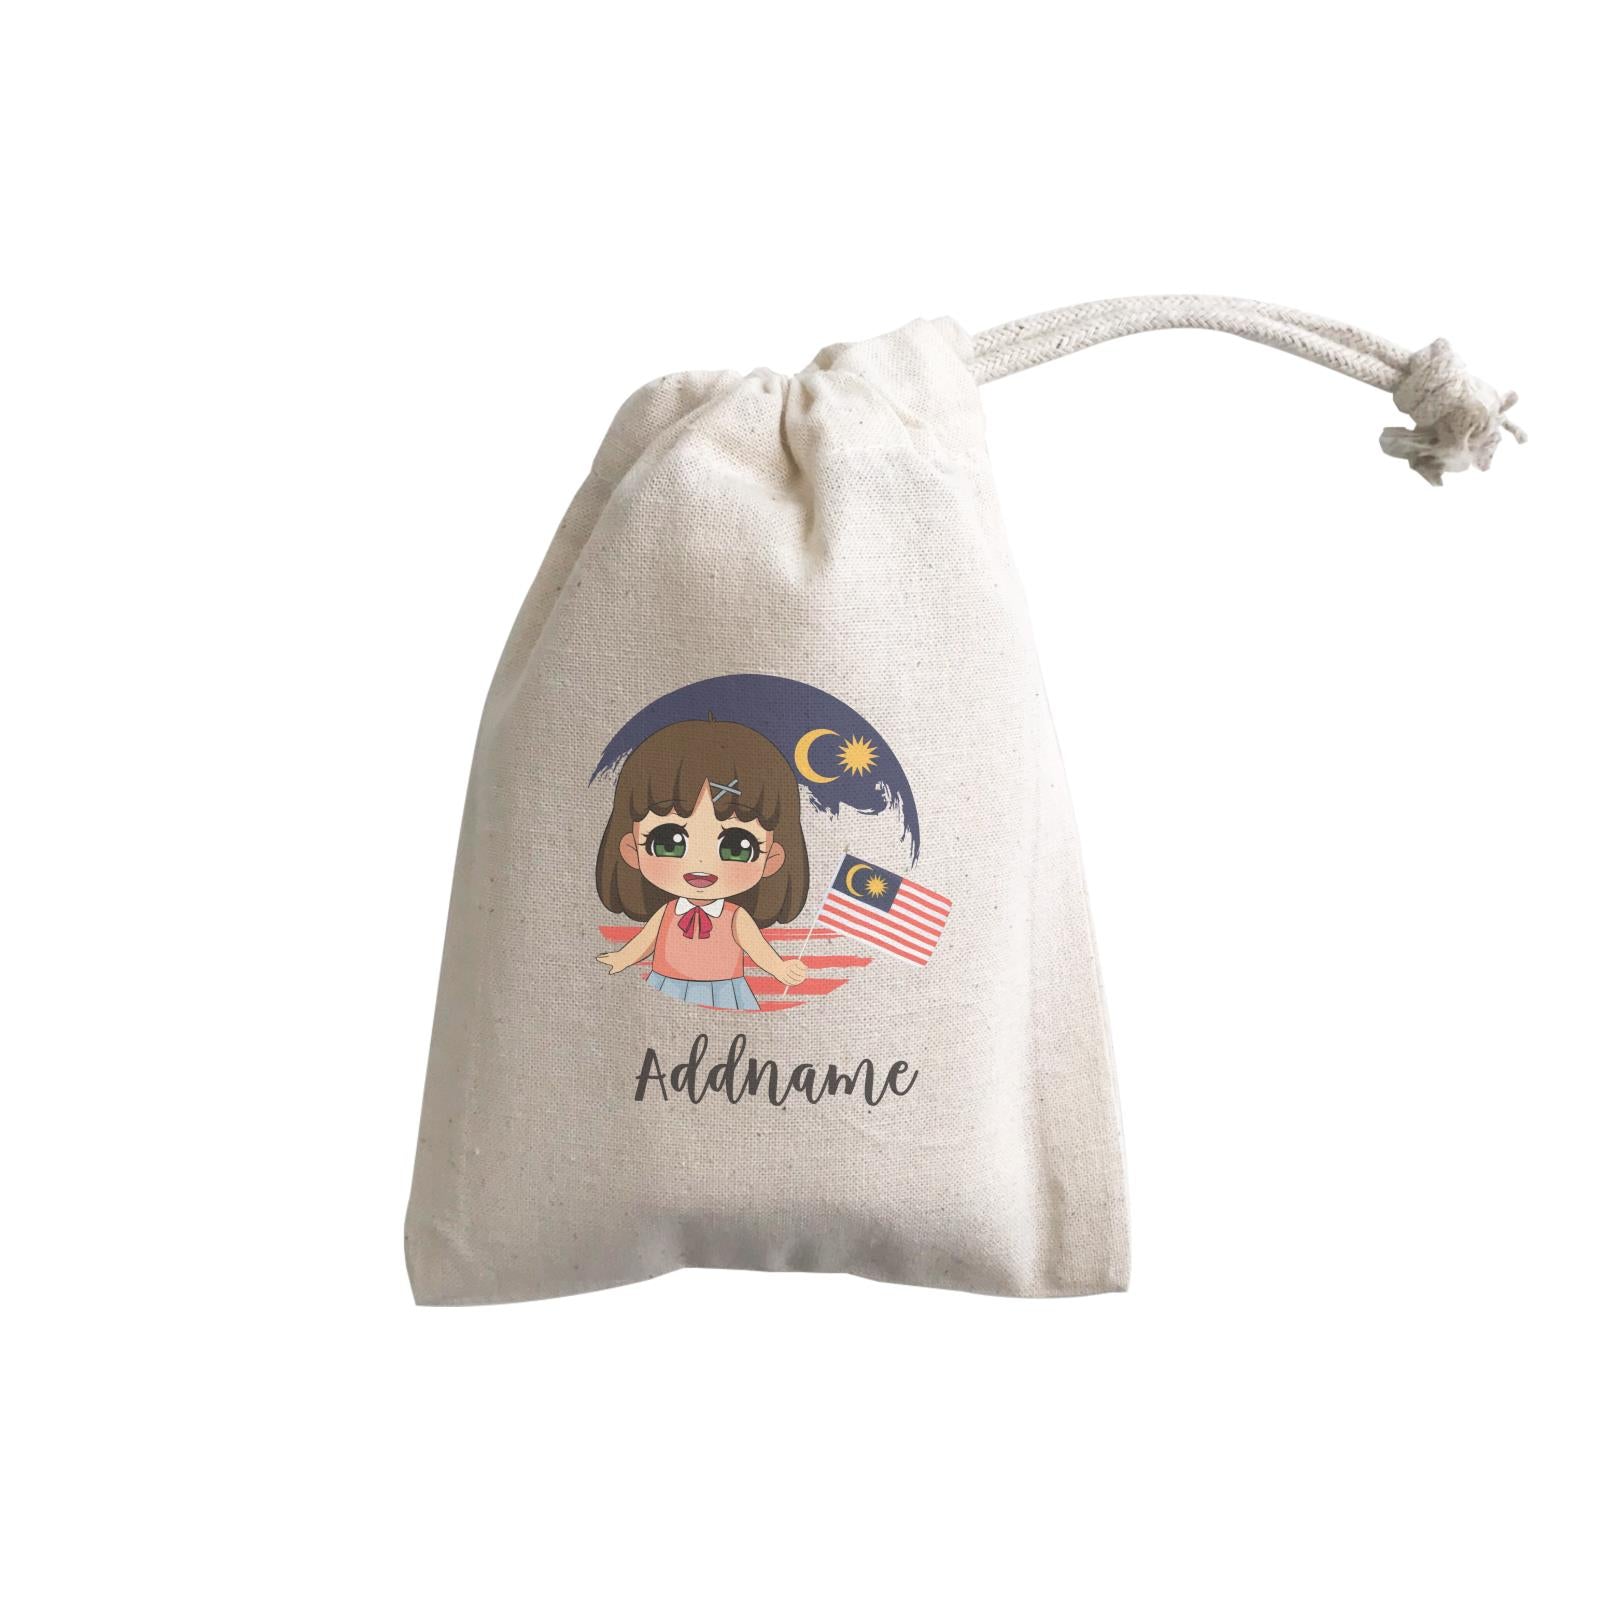 Merdeka Series Round Flag Chinese Girl Addname GP Gift Pouch